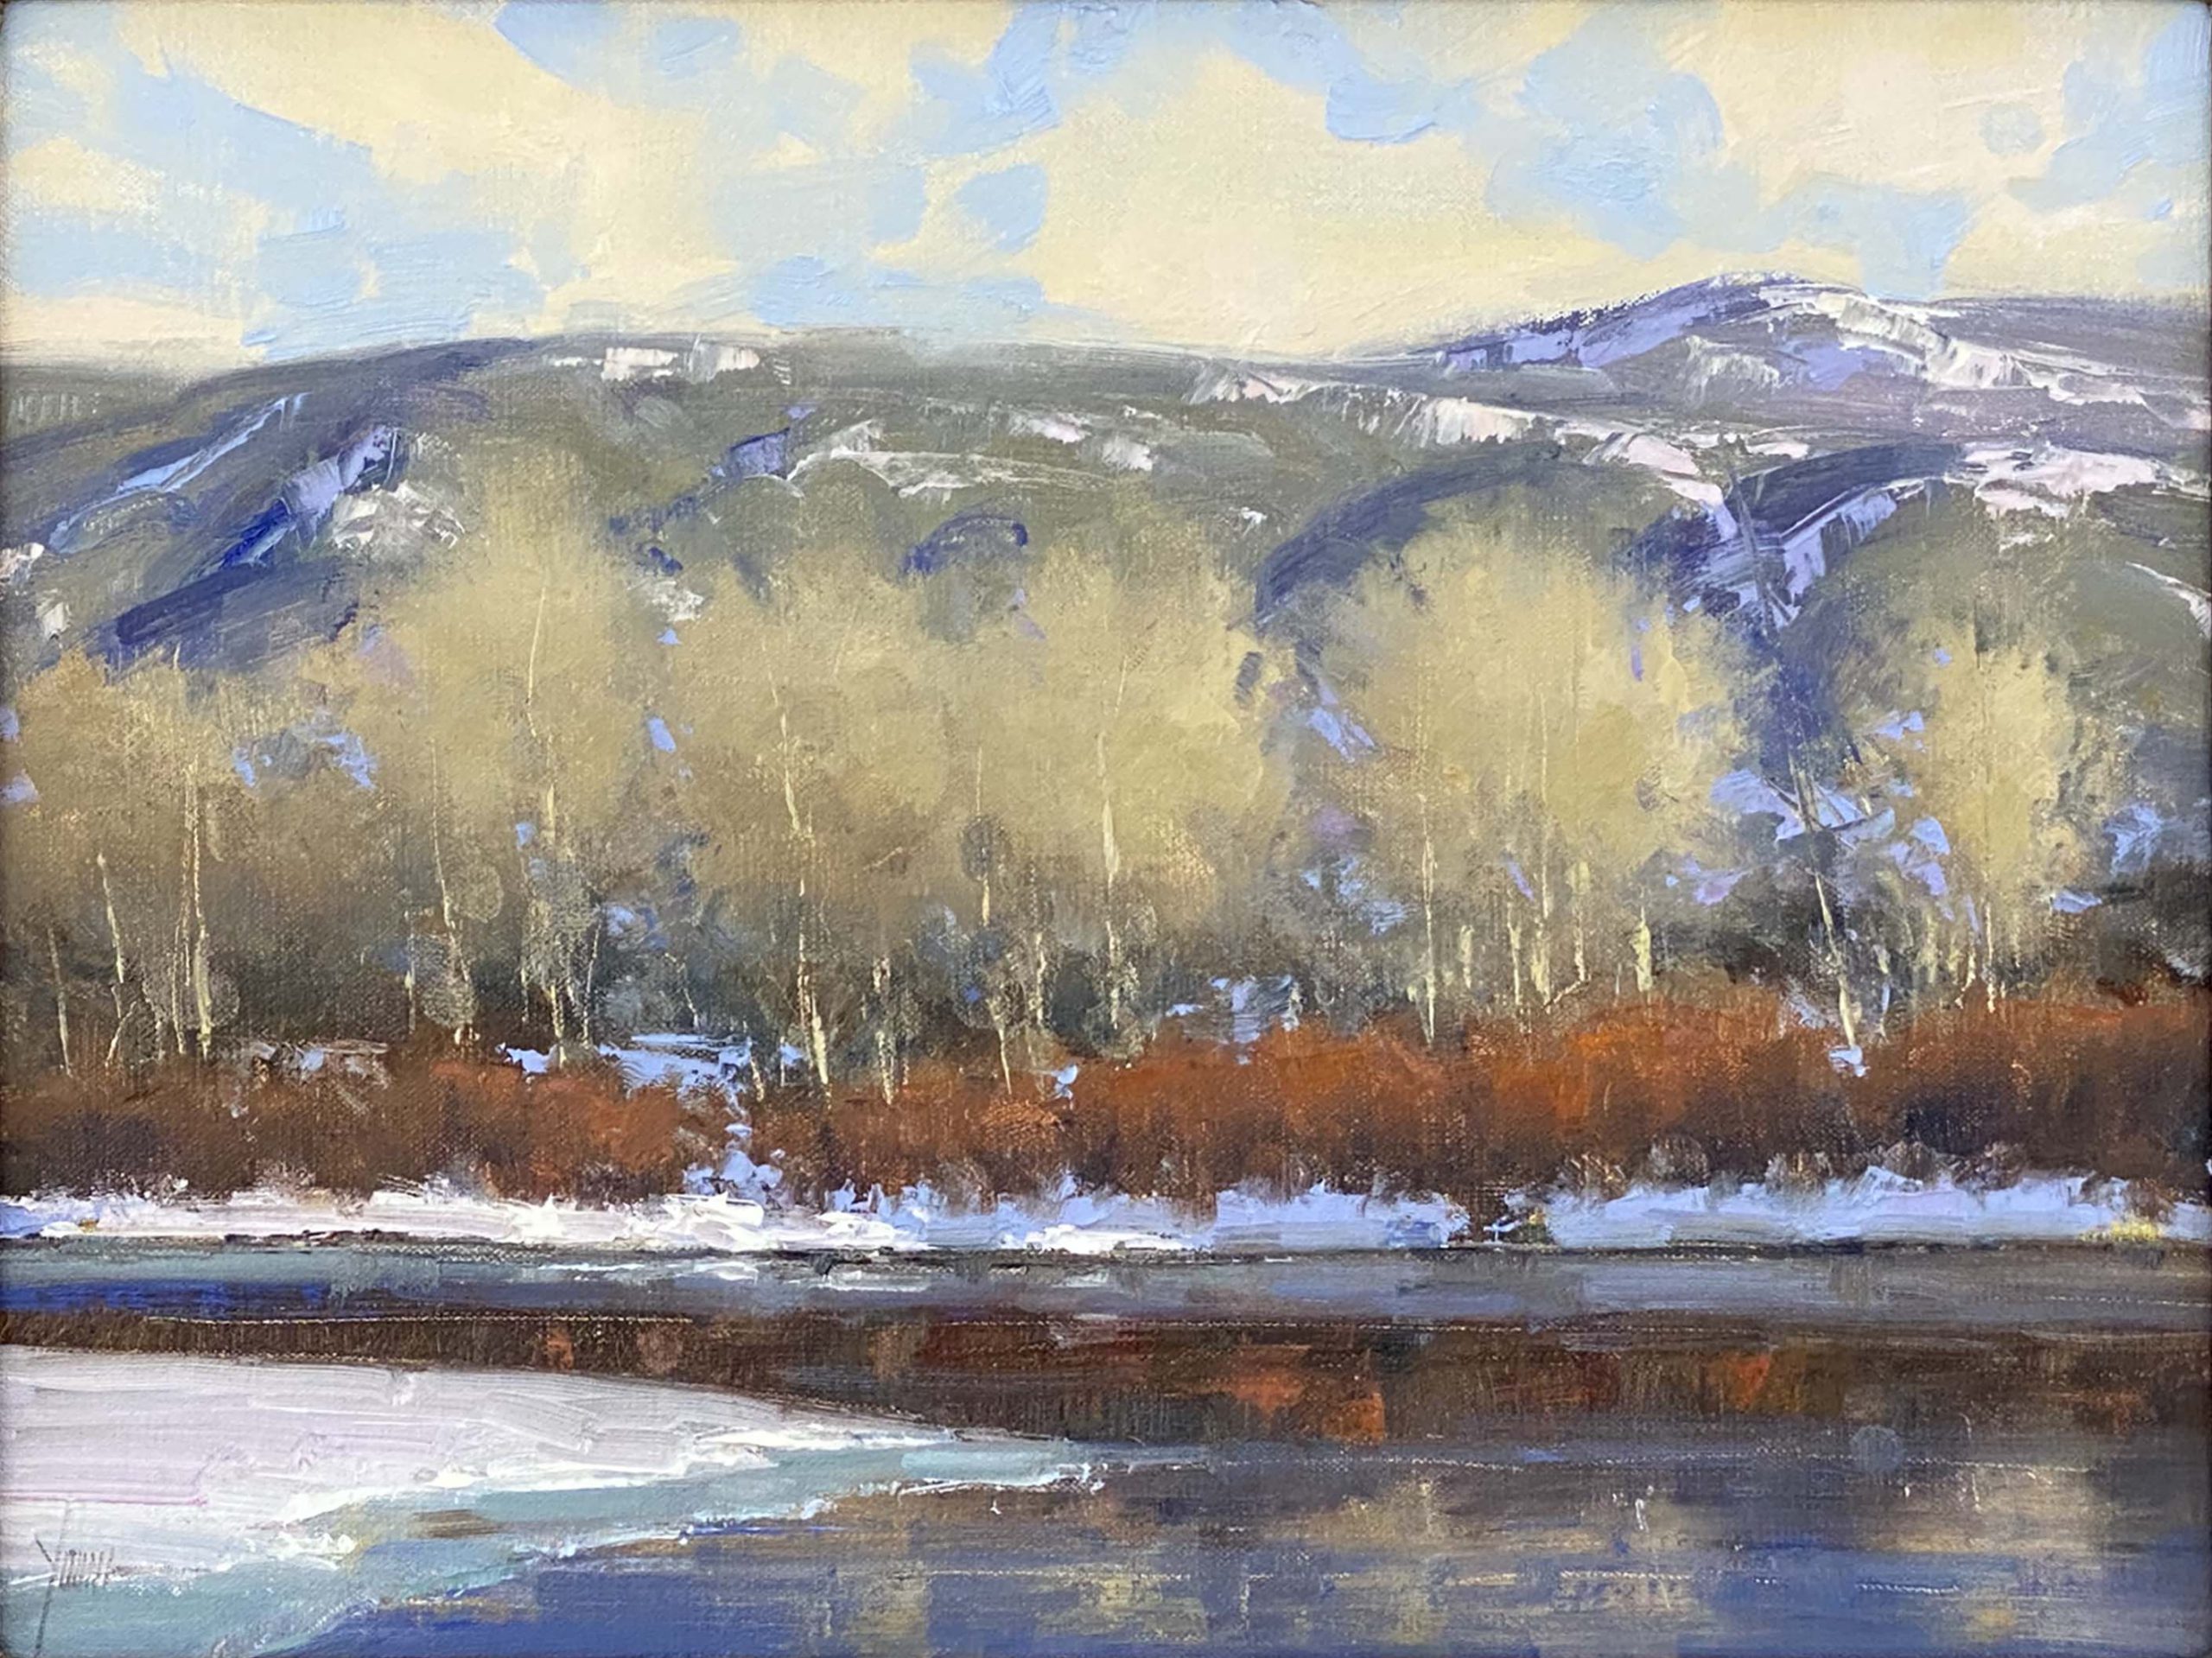 Dan Young - January on the Colorado